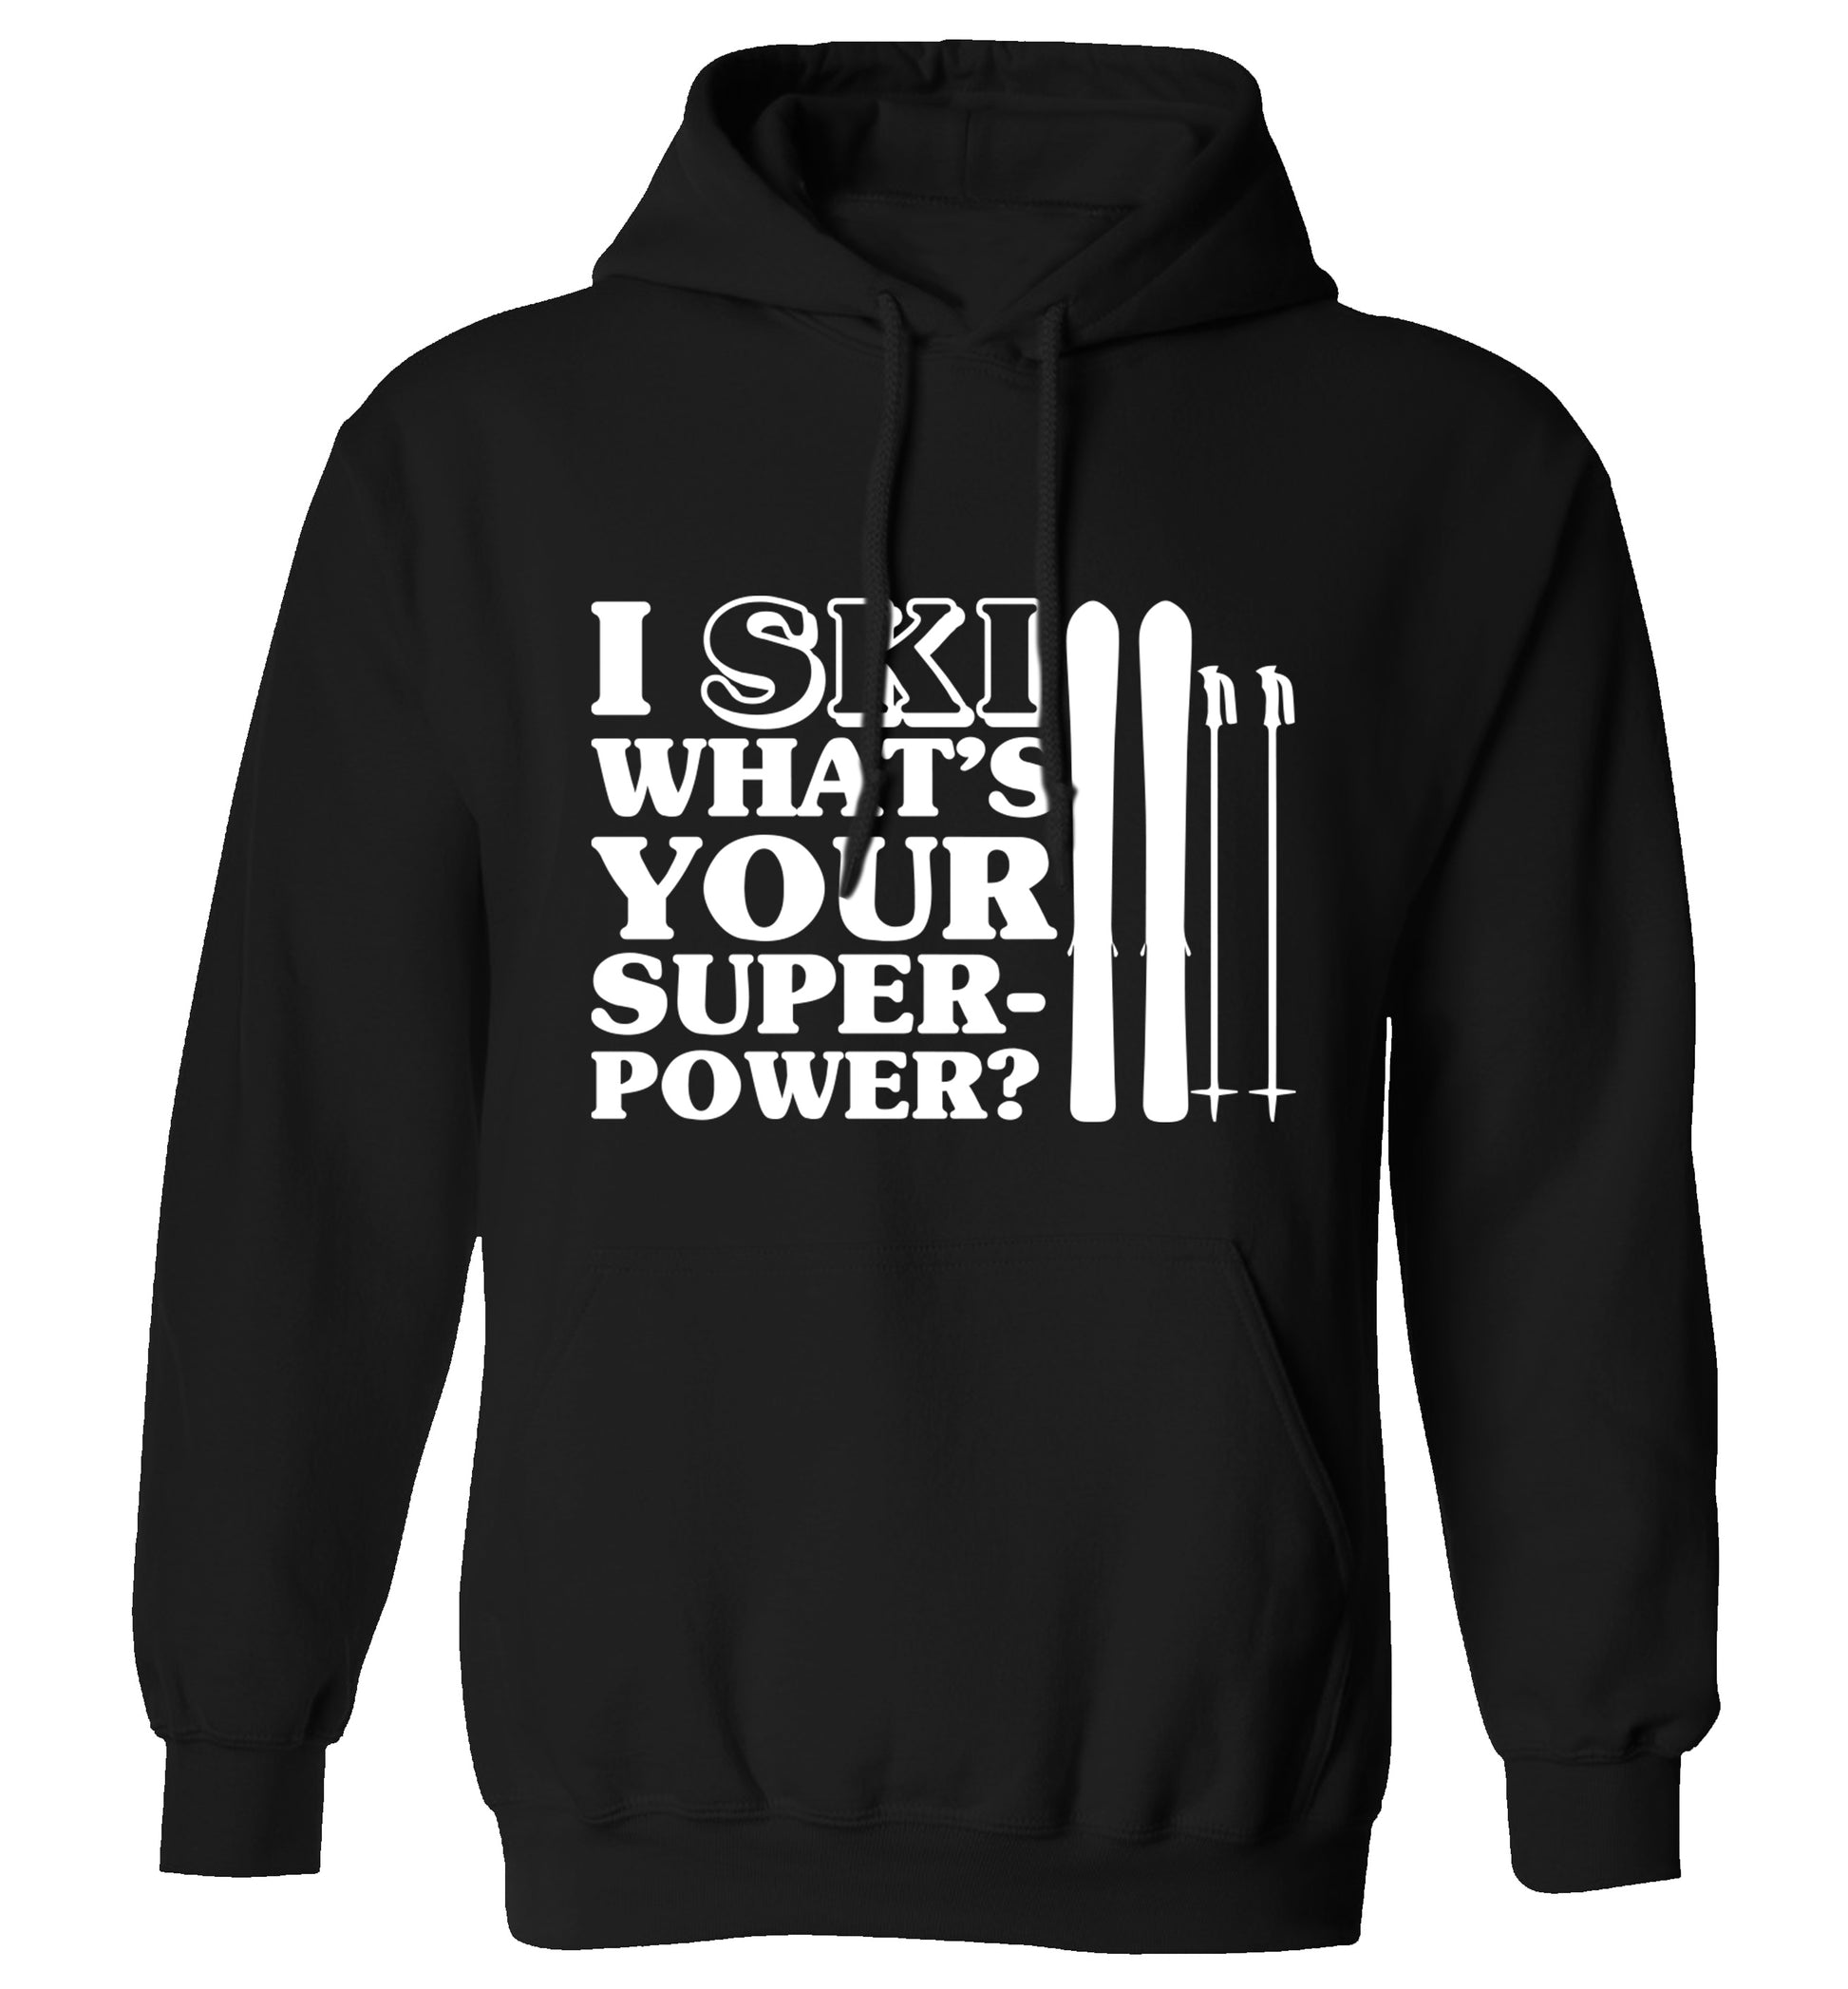 I ski what's your superpower? adults unisexblack hoodie 2XL